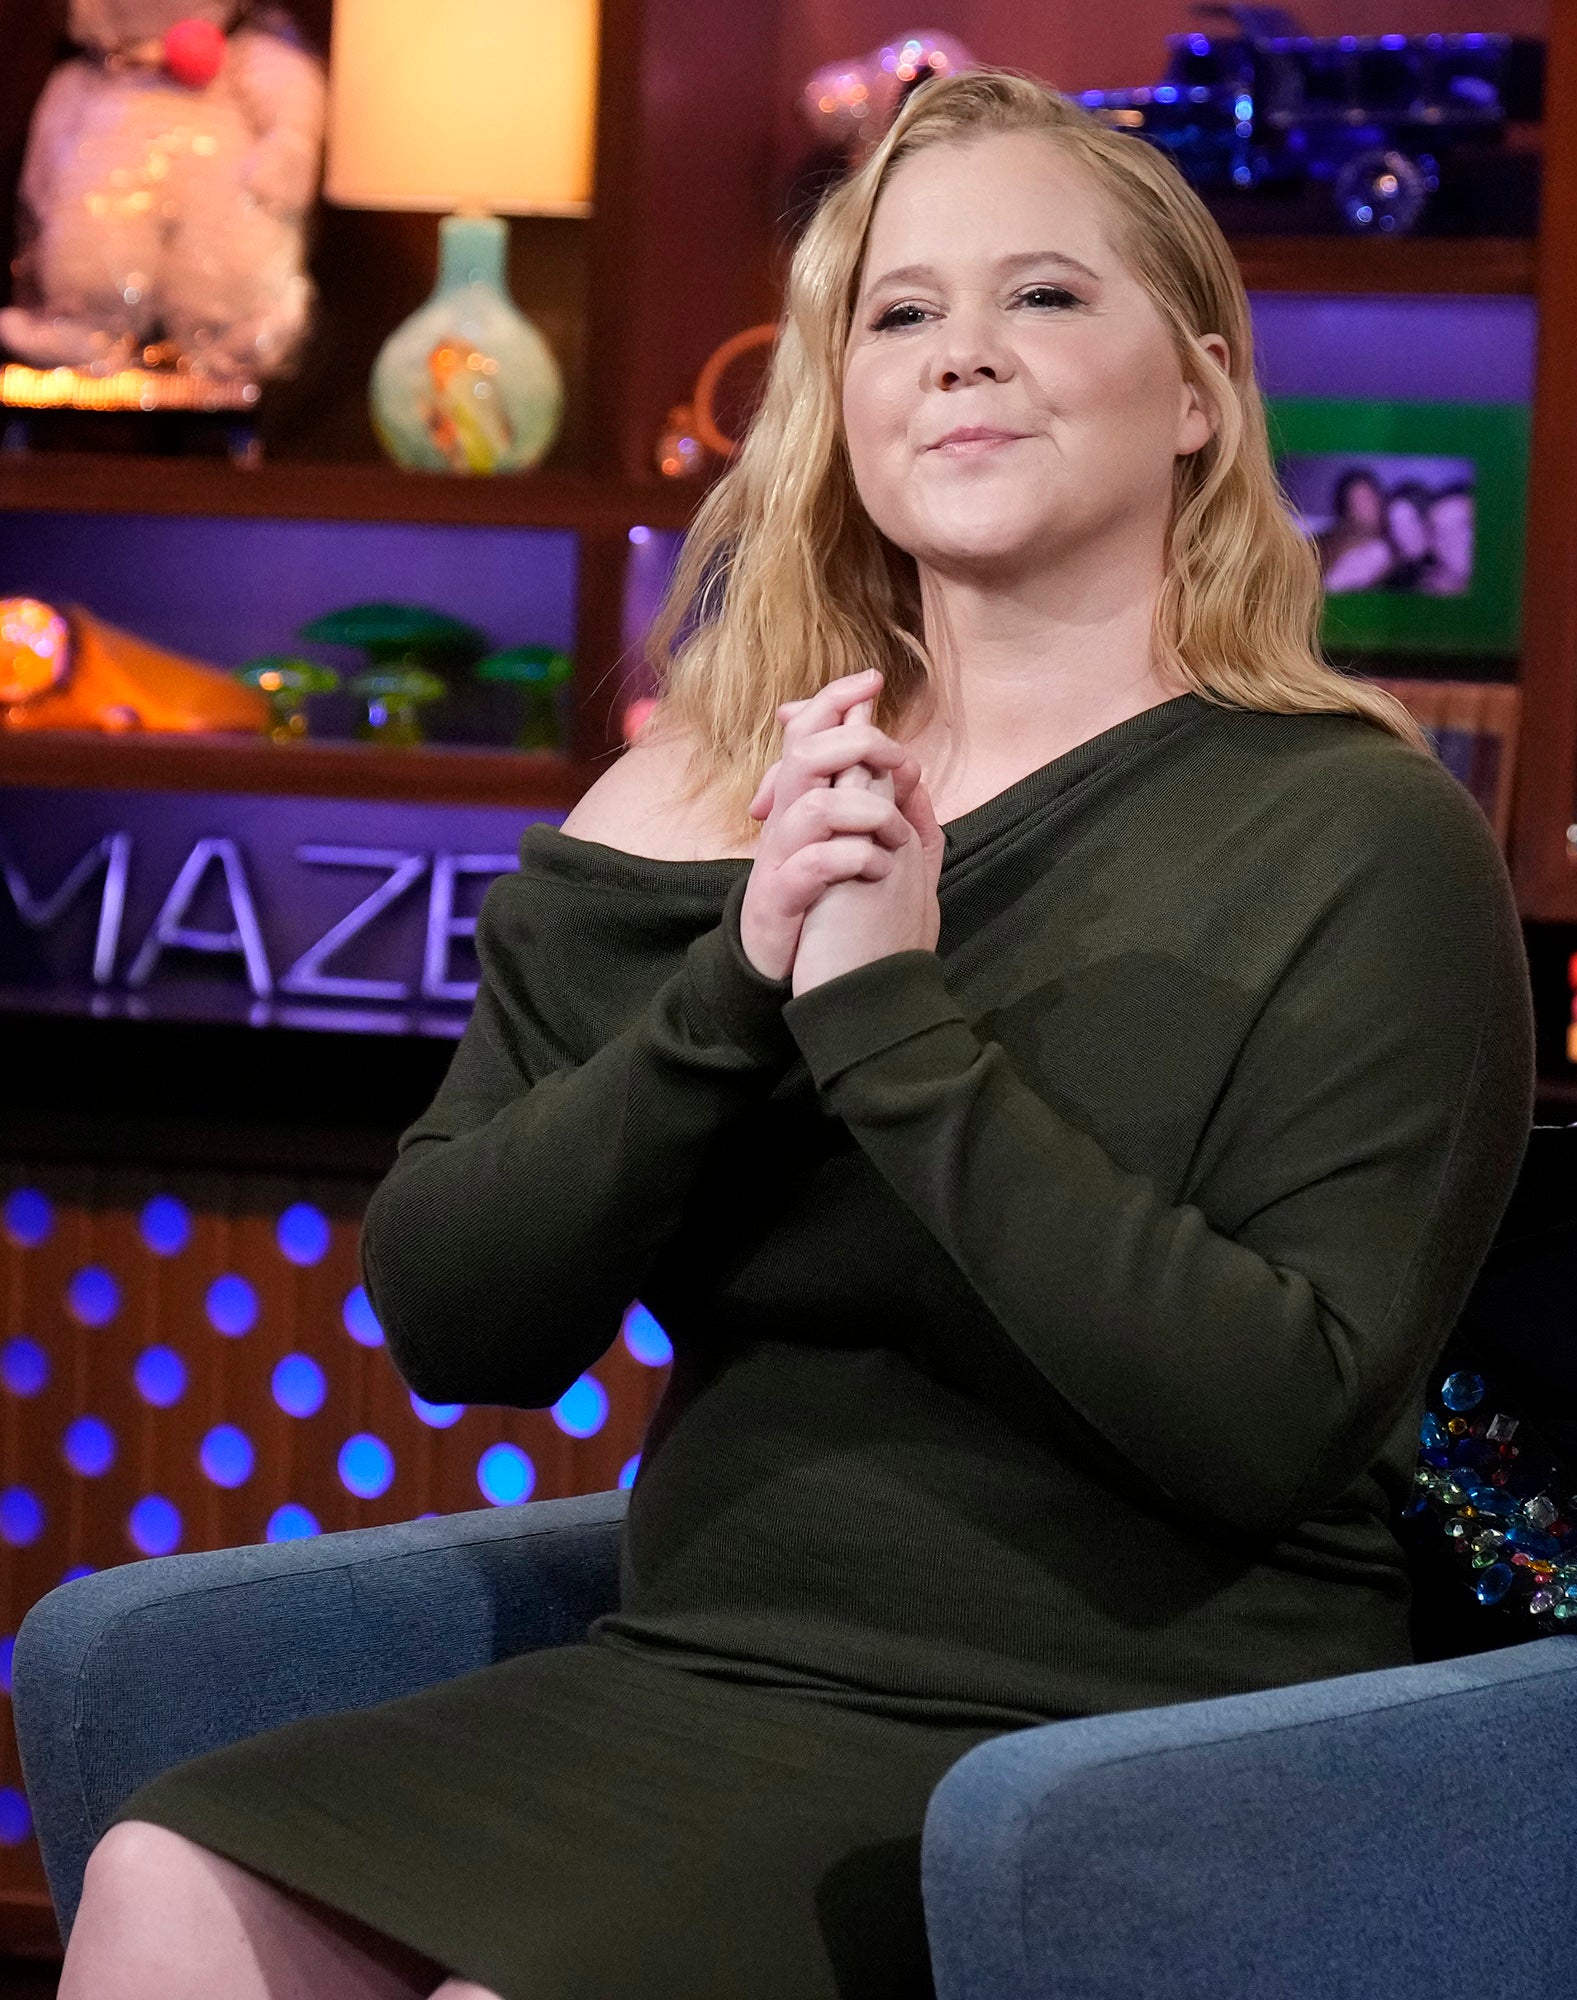 Amy Schumer in a TV show setting wears an off-shoulder dress, seated, smiling